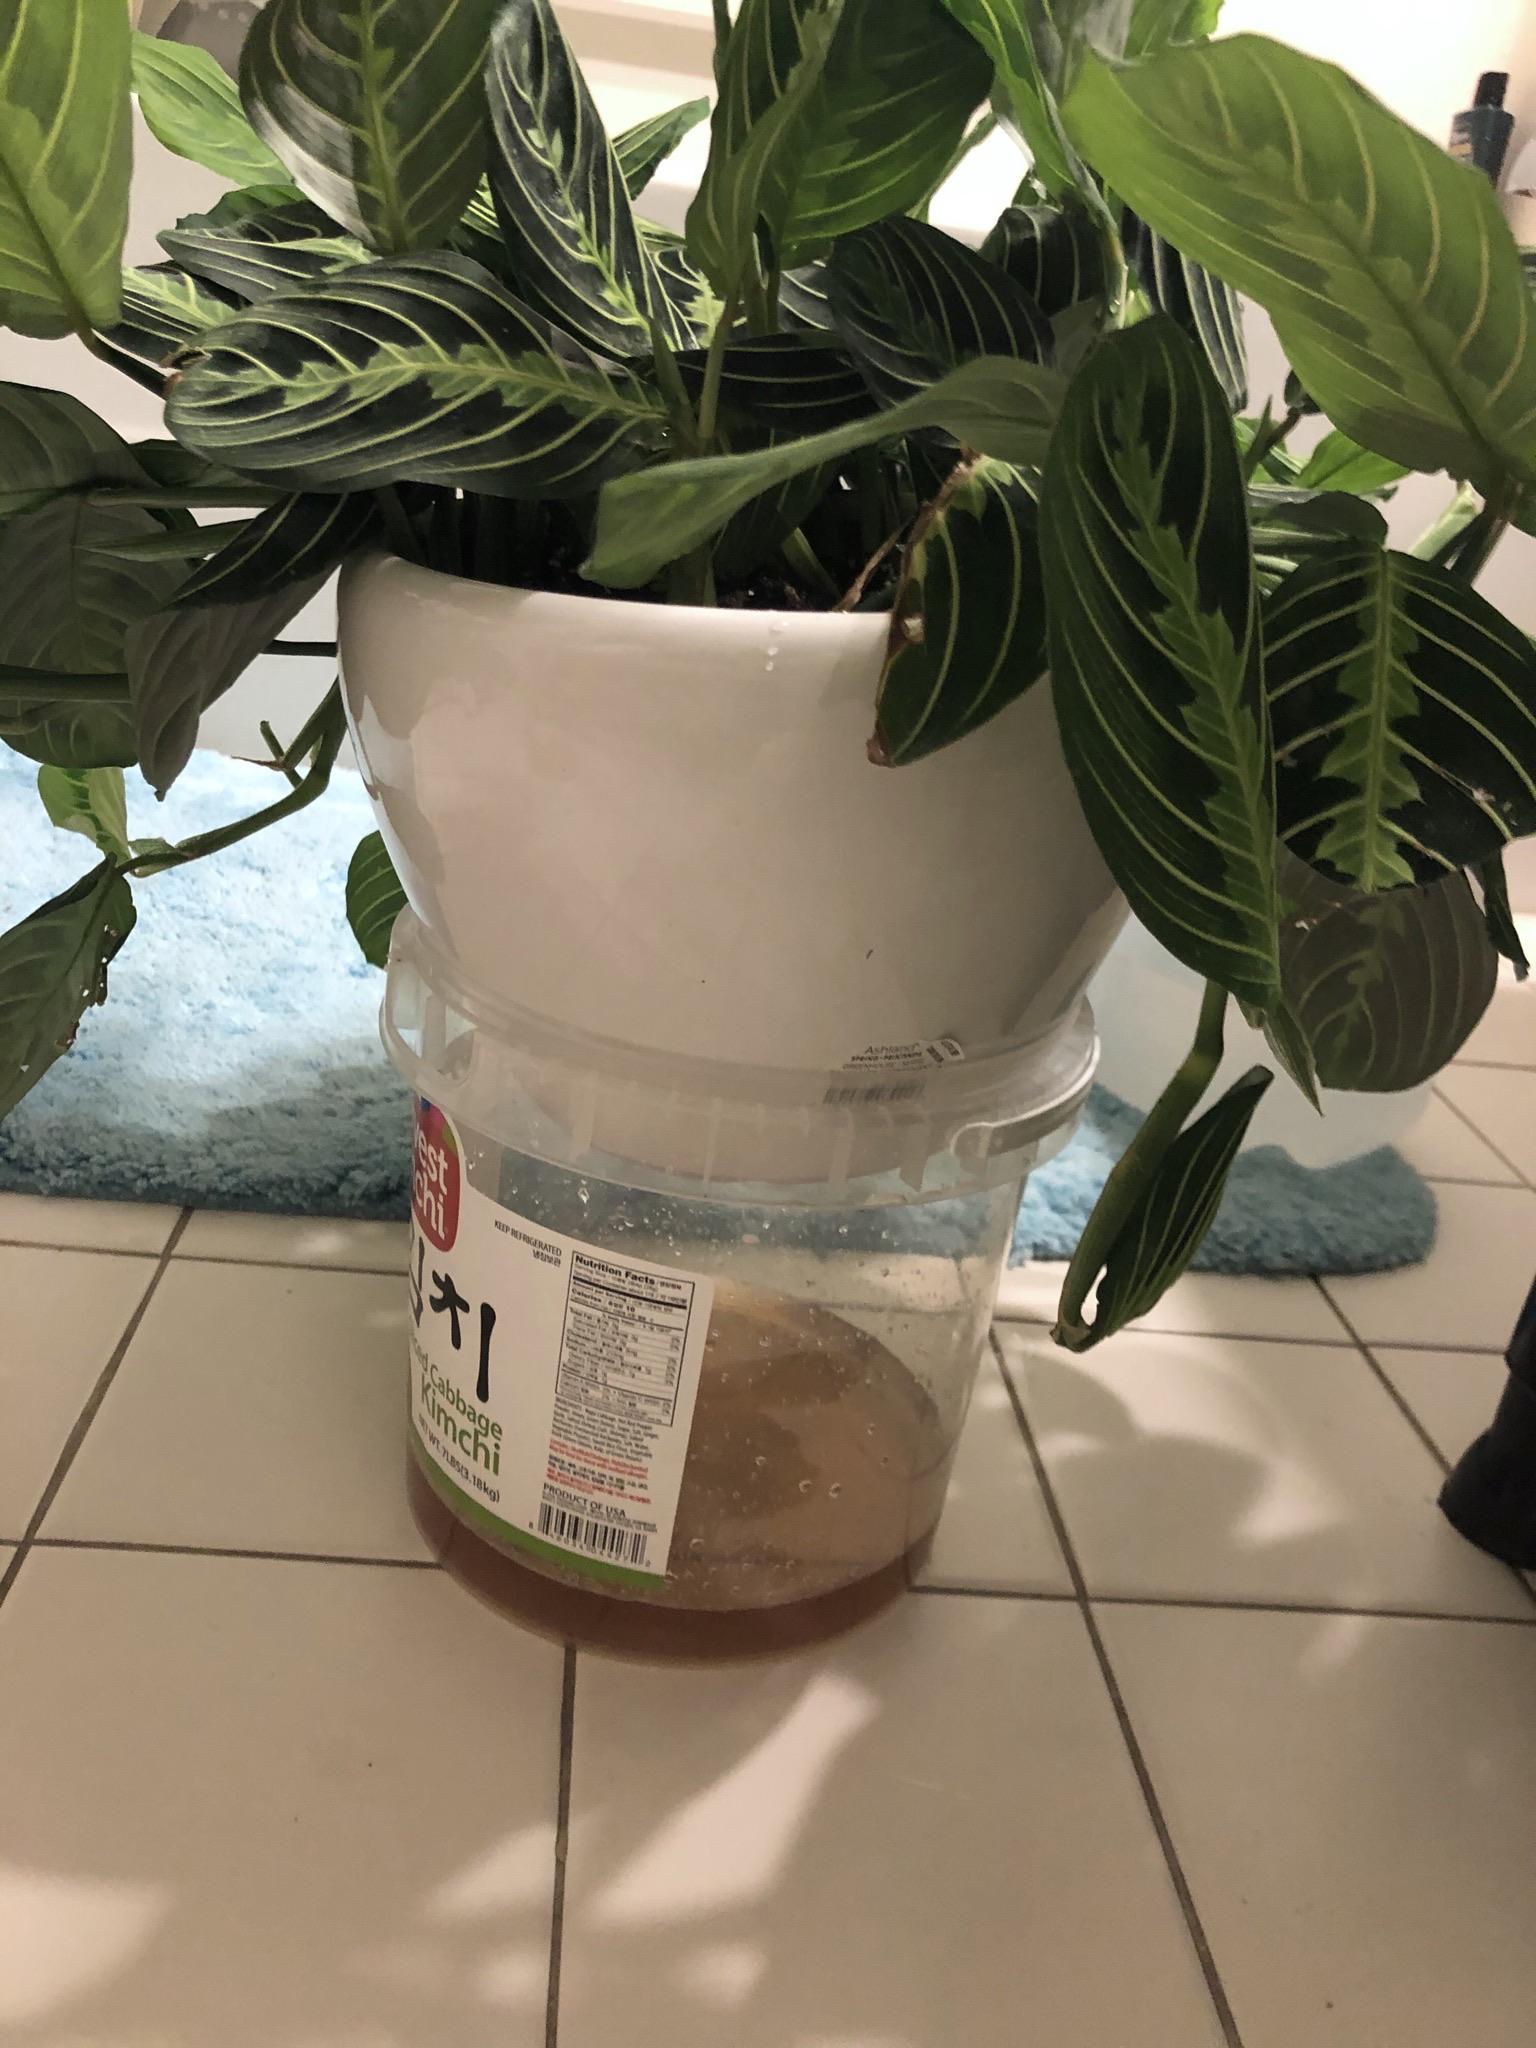 How To Keep Plants With Drainage Holes From Making a Mess?